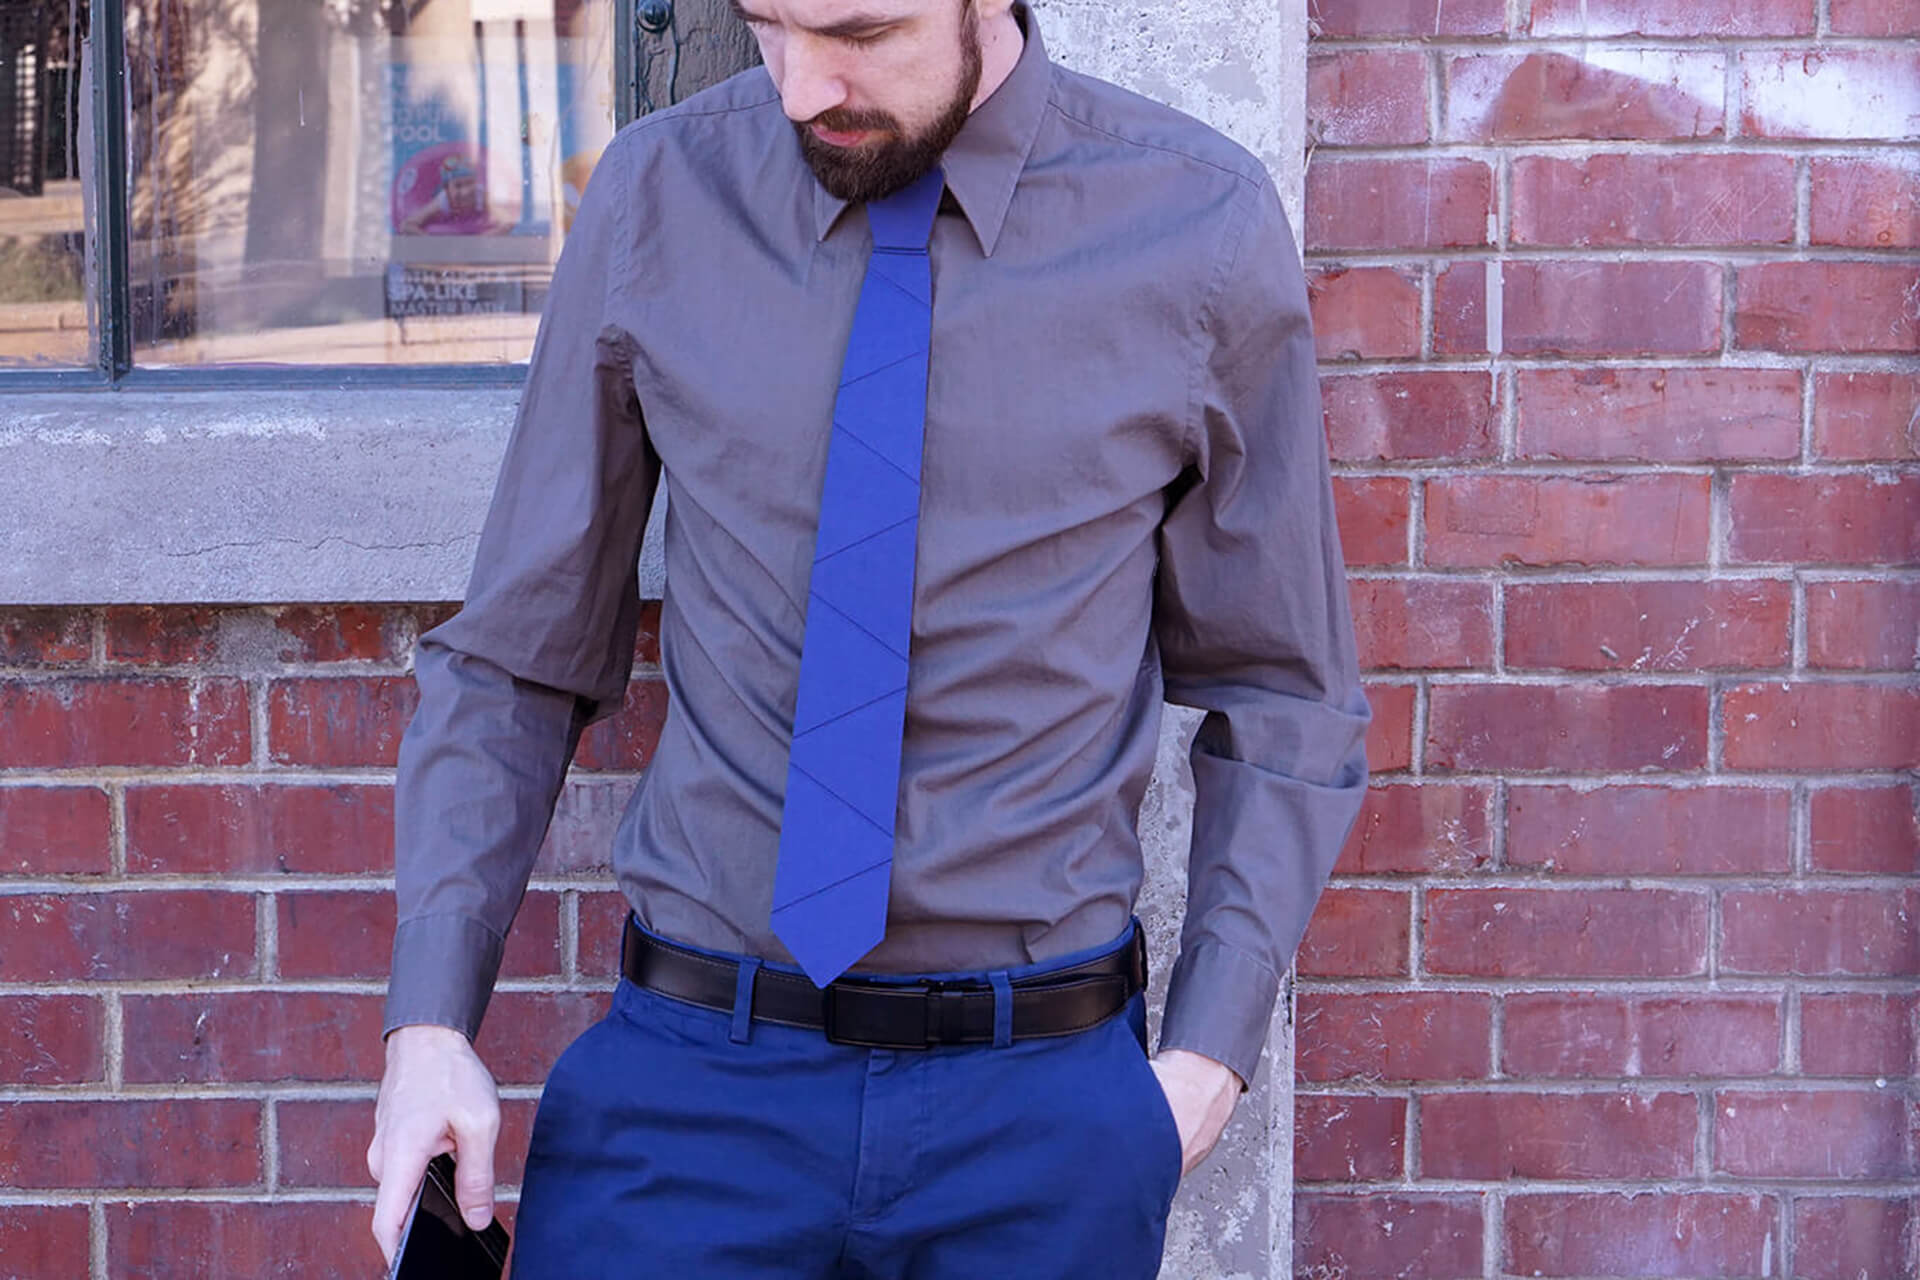 A lifestyle shot showing off a blue cardboard tie on a sexy man